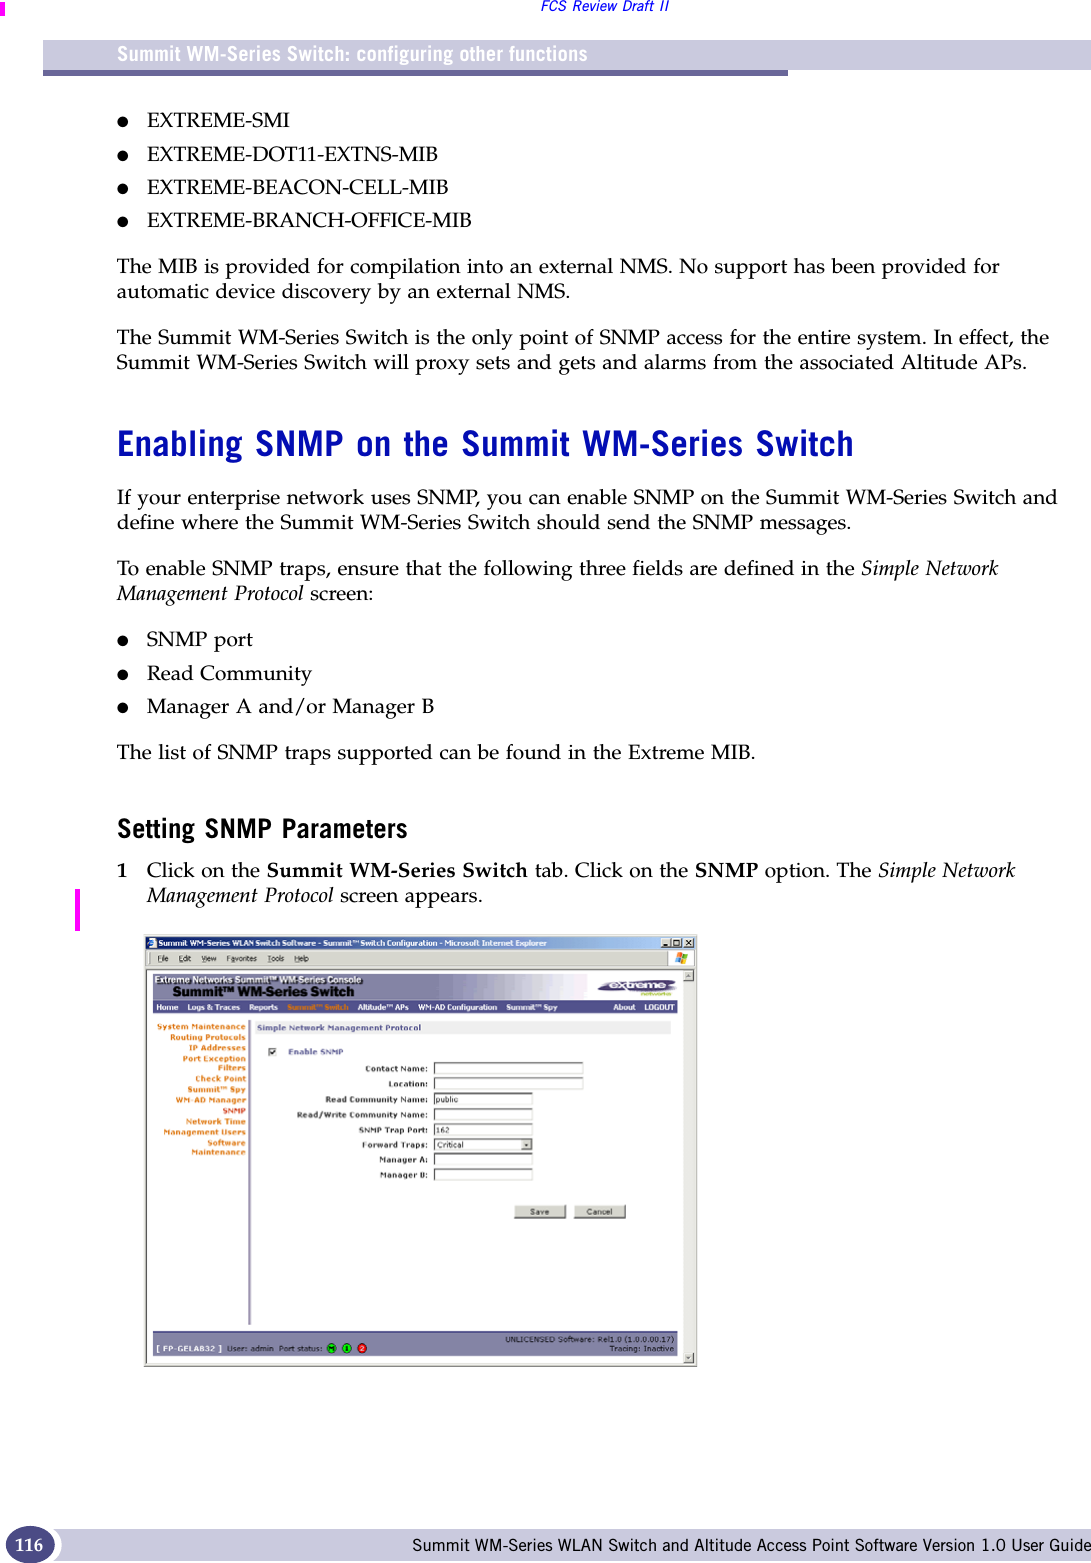 Summit WM-Series Switch: configuring other functionsFCS Review Draft IISummit WM-Series WLAN Switch and Altitude Access Point Software Version 1.0 User Guide116●EXTREME-SMI●EXTREME-DOT11-EXTNS-MIB●EXTREME-BEACON-CELL-MIB●EXTREME-BRANCH-OFFICE-MIBThe MIB is provided for compilation into an external NMS. No support has been provided for automatic device discovery by an external NMS.The Summit WM-Series Switch is the only point of SNMP access for the entire system. In effect, the Summit WM-Series Switch will proxy sets and gets and alarms from the associated Altitude APs.Enabling SNMP on the Summit WM-Series SwitchIf your enterprise network uses SNMP, you can enable SNMP on the Summit WM-Series Switch and define where the Summit WM-Series Switch should send the SNMP messages. To enable SNMP traps, ensure that the following three fields are defined in the Simple Network Management Protocol screen:●SNMP port ●Read Community●Manager A and/or Manager B The list of SNMP traps supported can be found in the Extreme MIB.Setting SNMP Parameters1Click on the Summit WM-Series Switch tab. Click on the SNMP option. The Simple Network Management Protocol screen appears. 